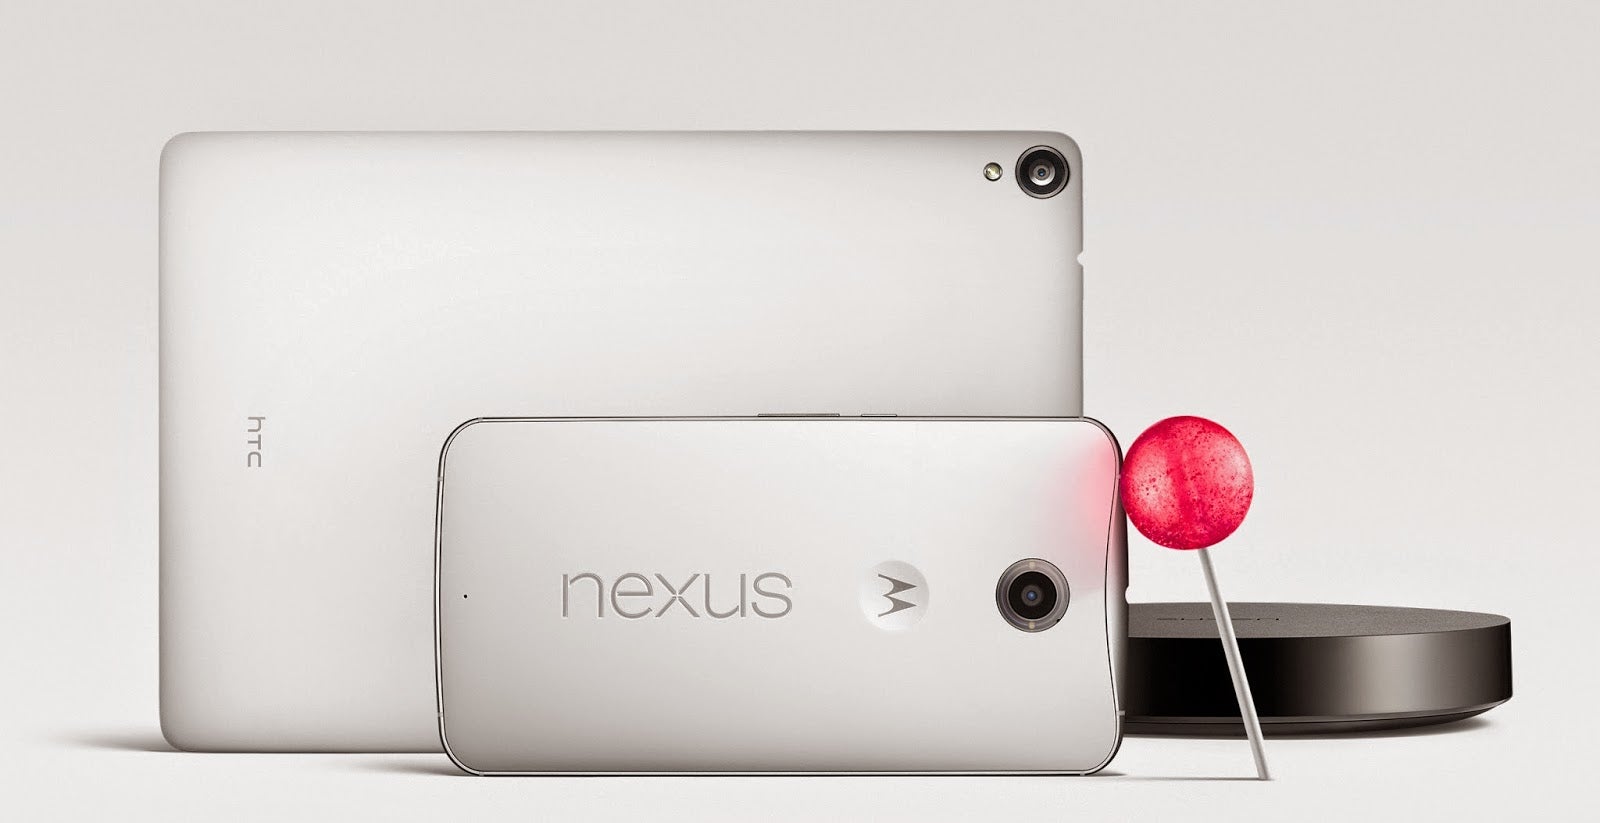 Nexus 6 officially unveiled: Google’s first phablet